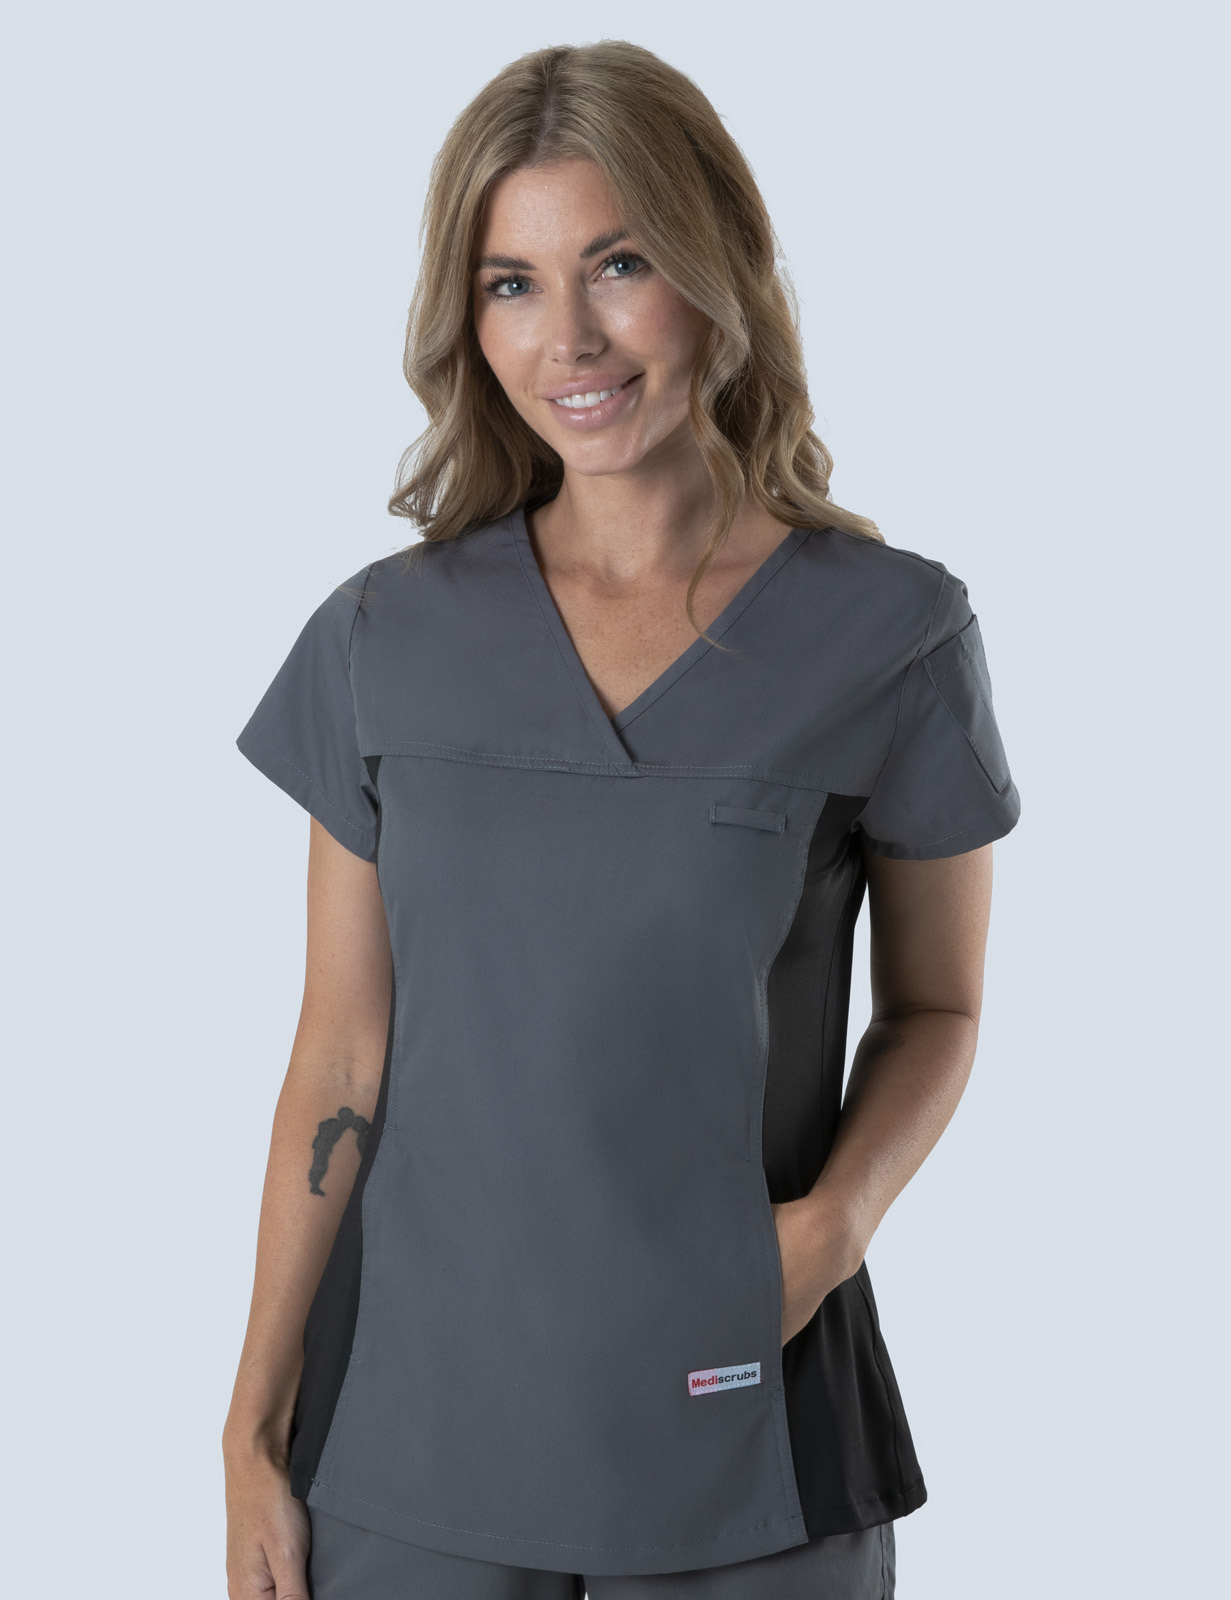 Women's Fit Solid Scrub Top With Spandex Panel - Steel Grey - X Large